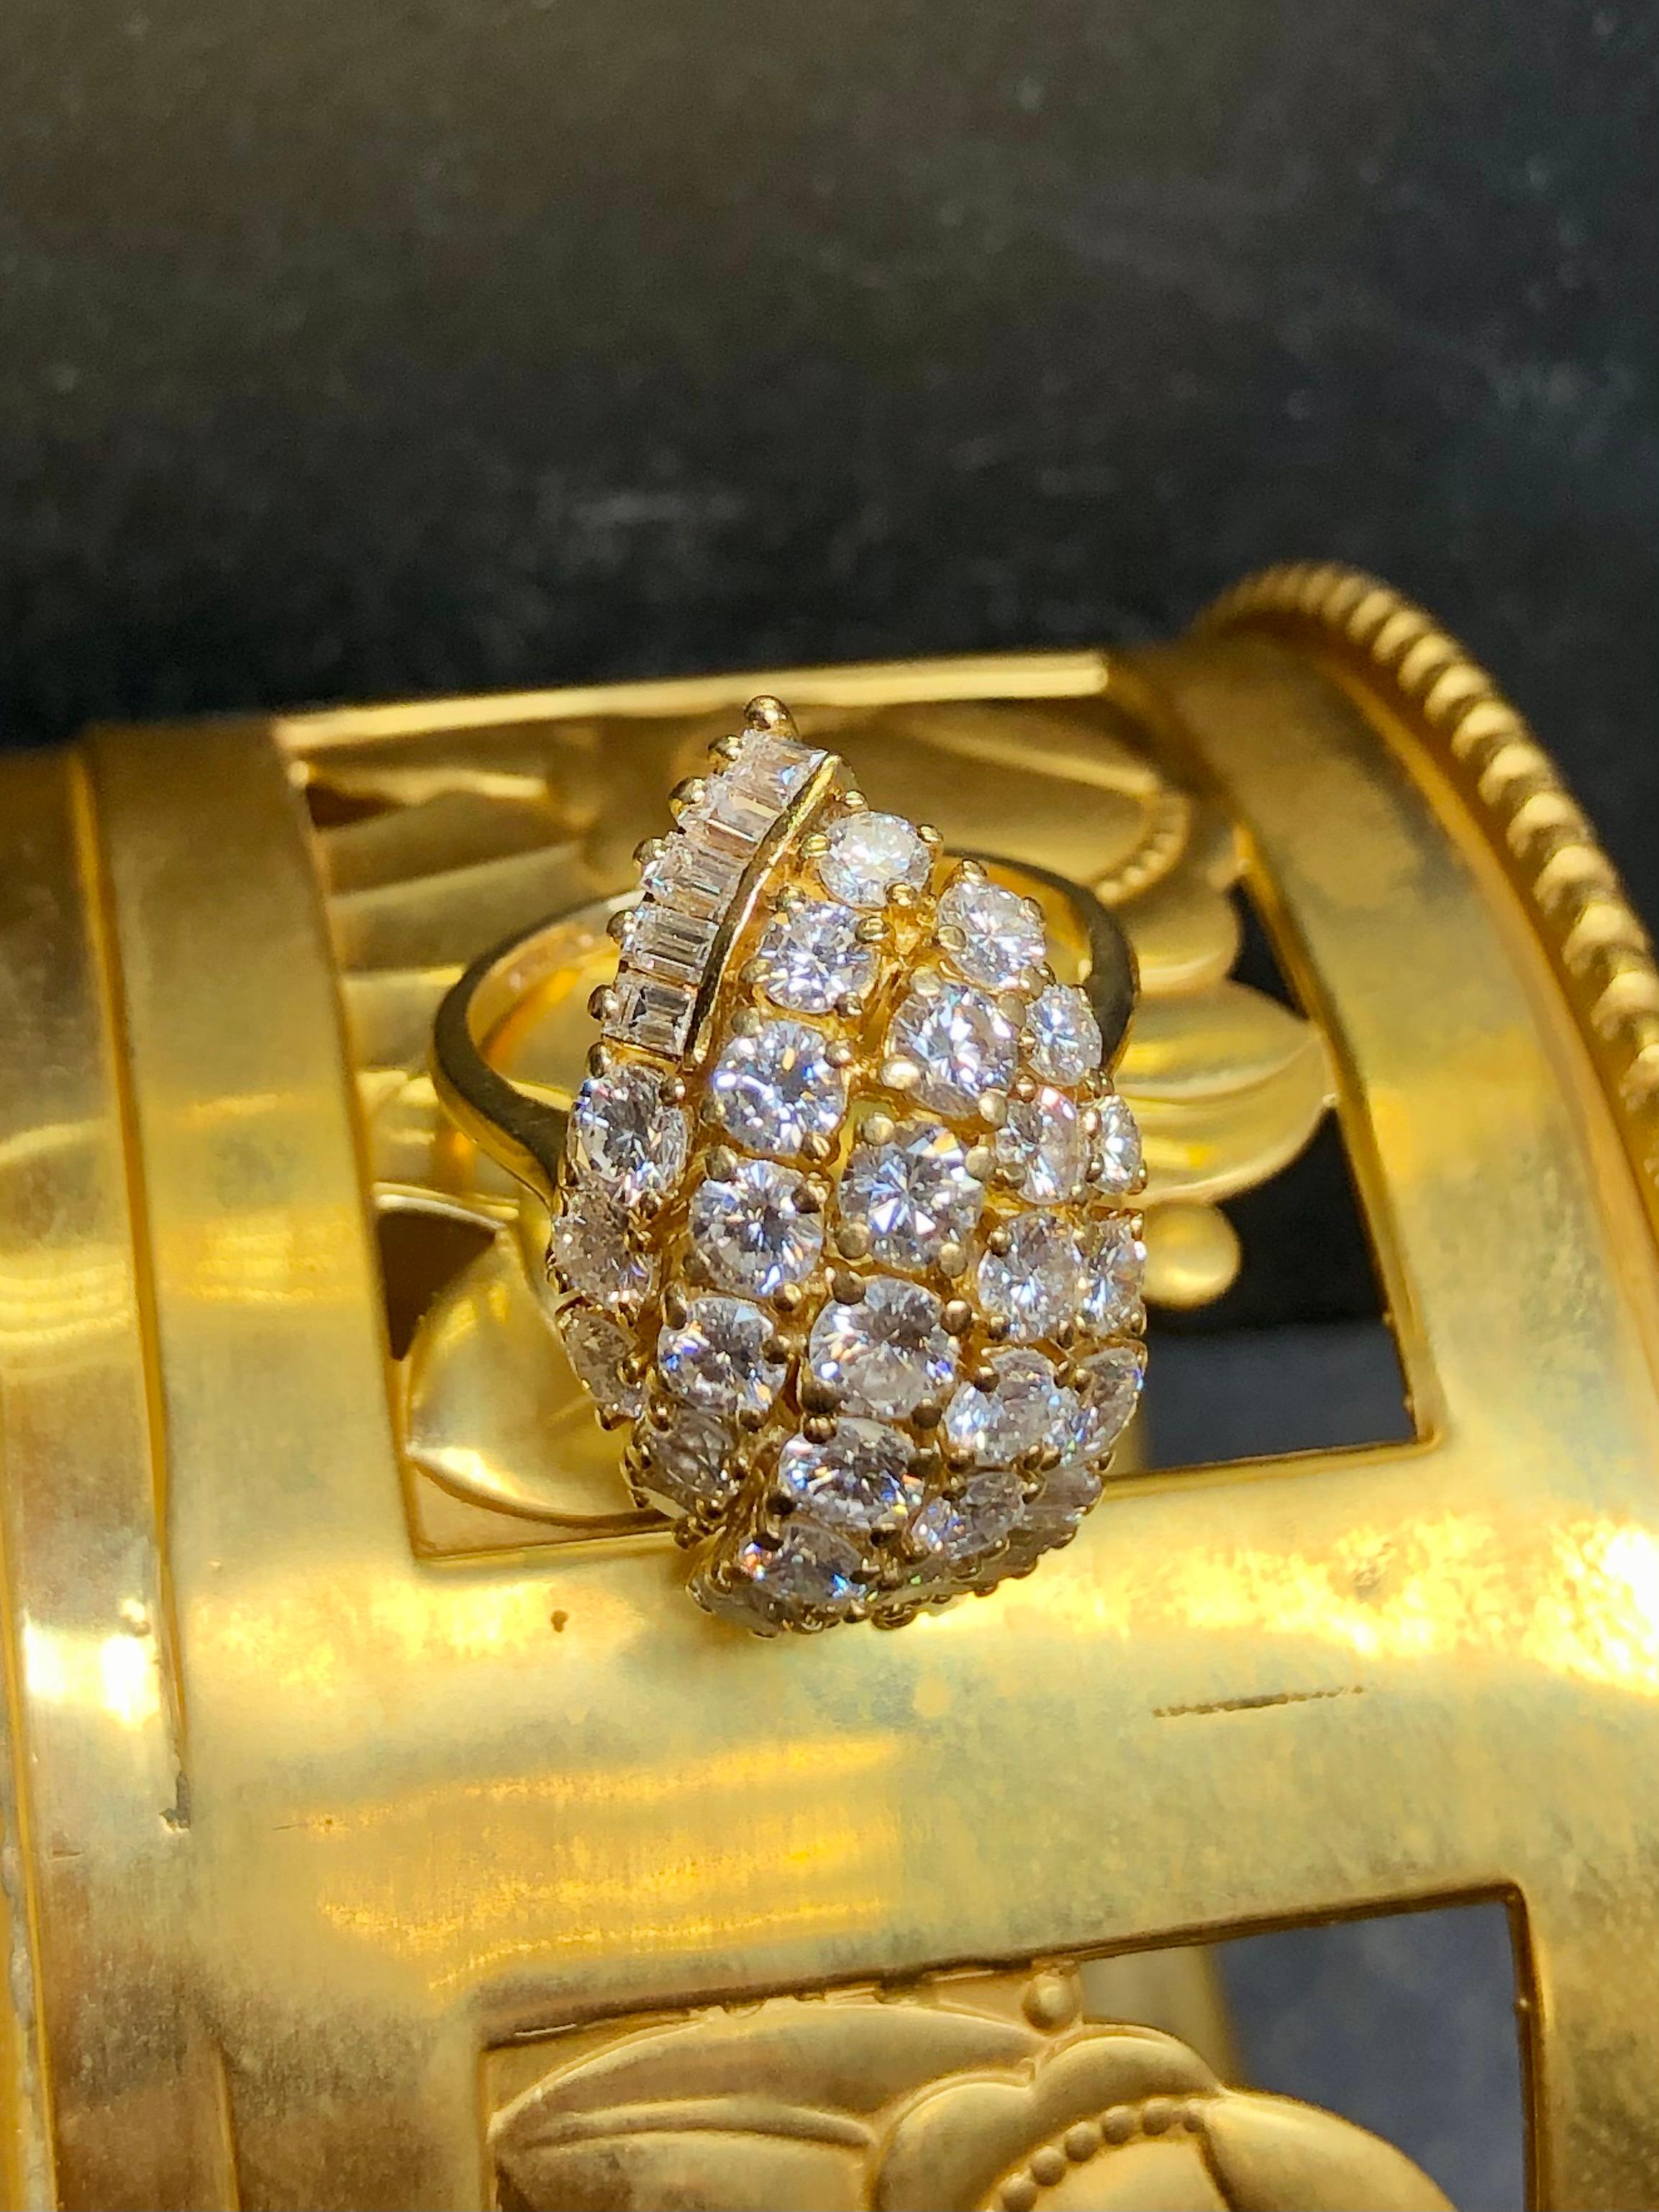 Vintage 18k Large Diamond Cluster Cocktail Ring 3.65cttw F Vs In Good Condition For Sale In Winter Springs, FL